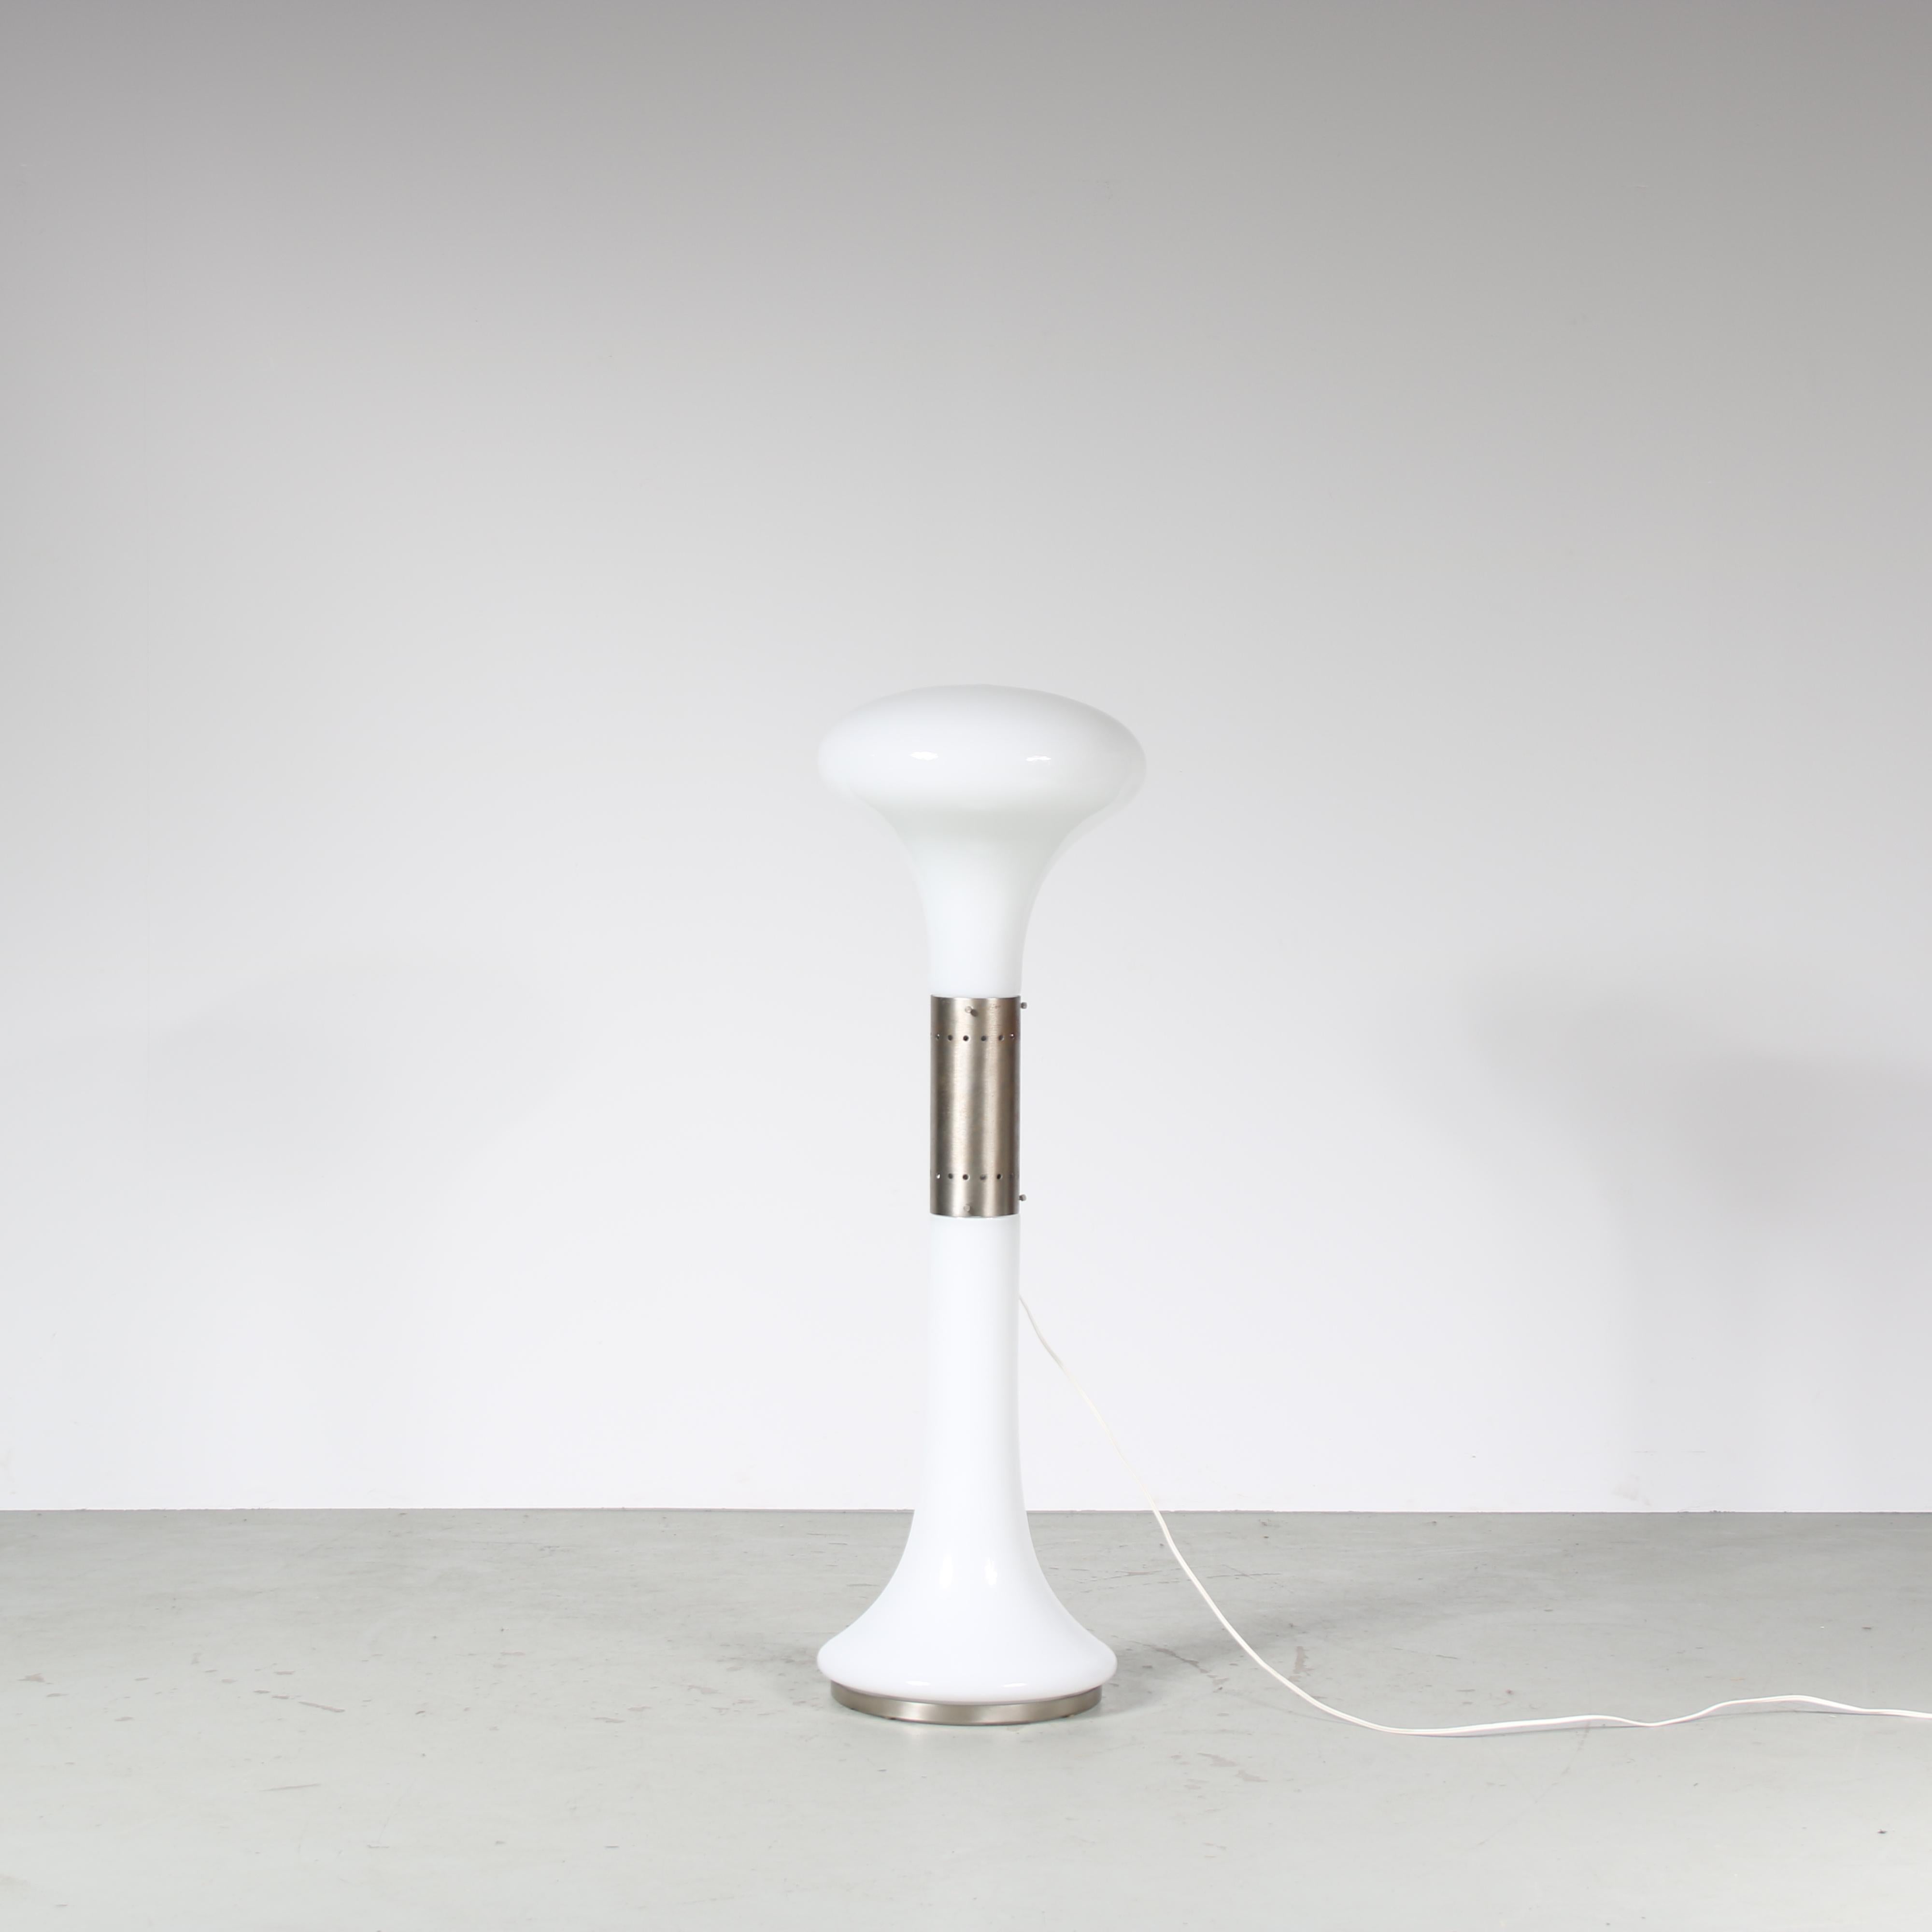 An eye-catching “I Numerati Soffiato” floor lamp designed by Carlo Nason and manufactured by Mazzega in Italy around 1970.

This stunning floor lamp has a unique and most appealing style. The lamp features a beautiful, white glass base that gives it